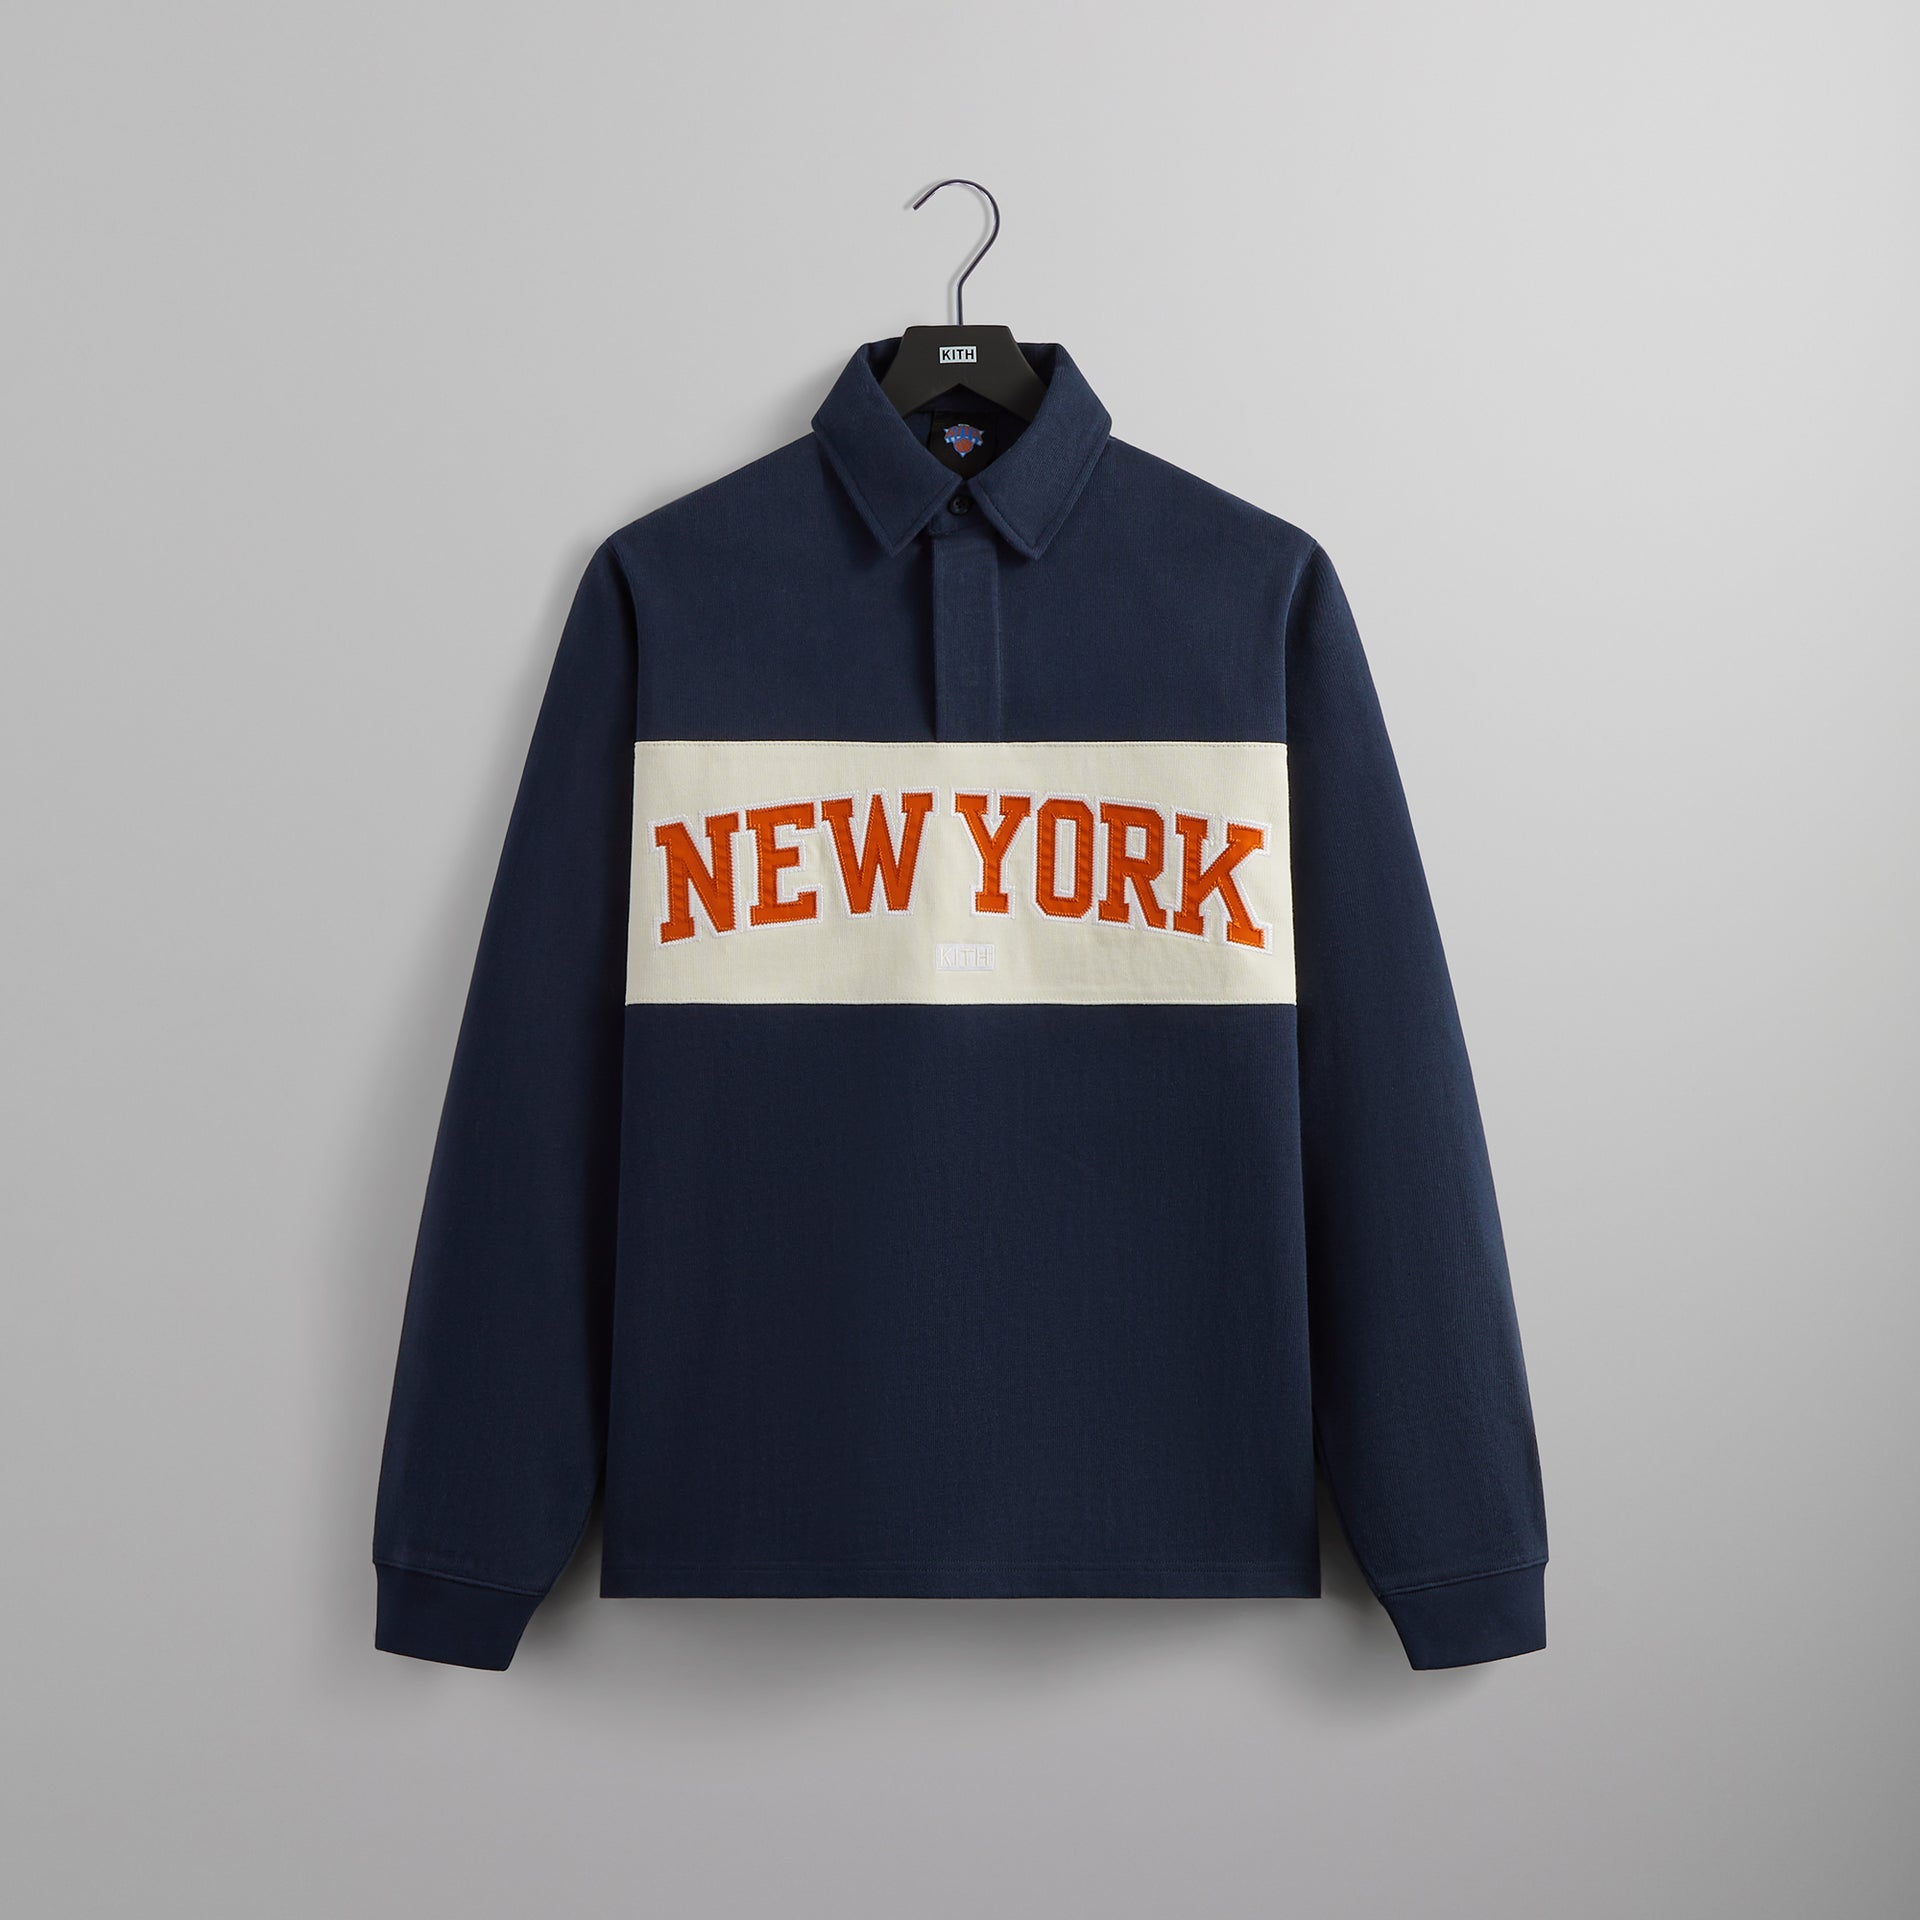 UrlfreezeShops for the New York Knicks Long Sleeve Rugby Shirt - Nocturnal